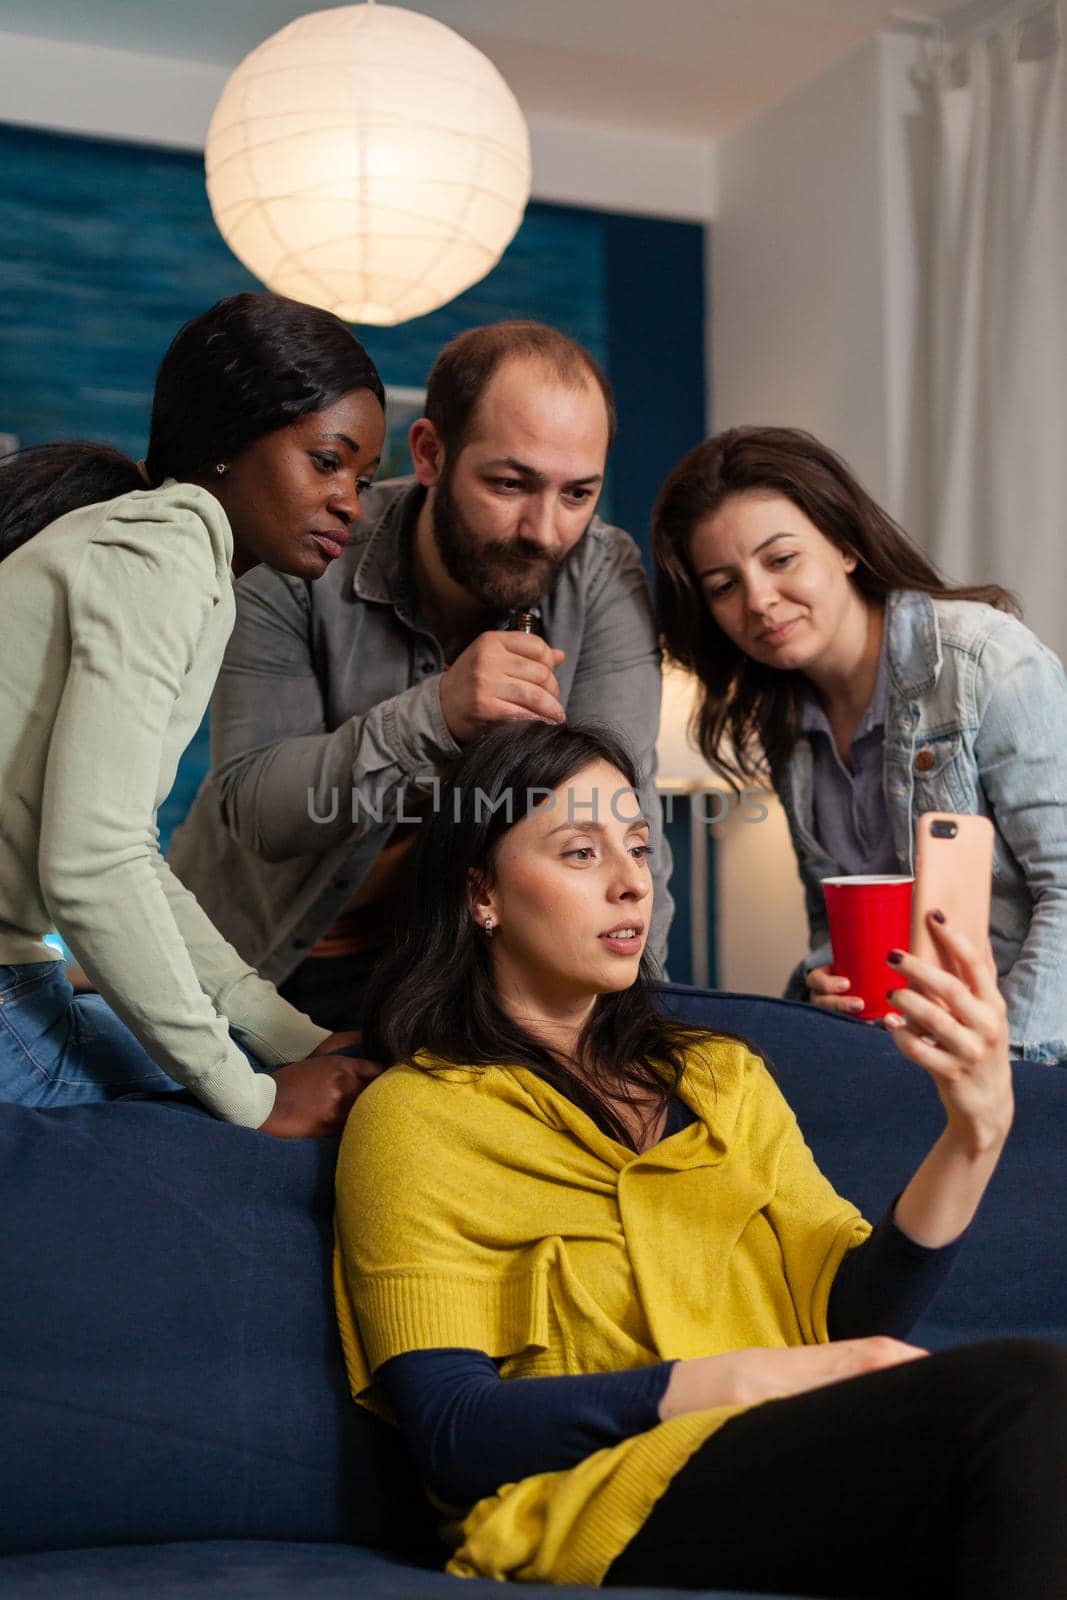 Multi ethnic friends having a virtual video call on smartphoneand bonding. Group of multiracial people spending time together sitting on couch late at night in living room.